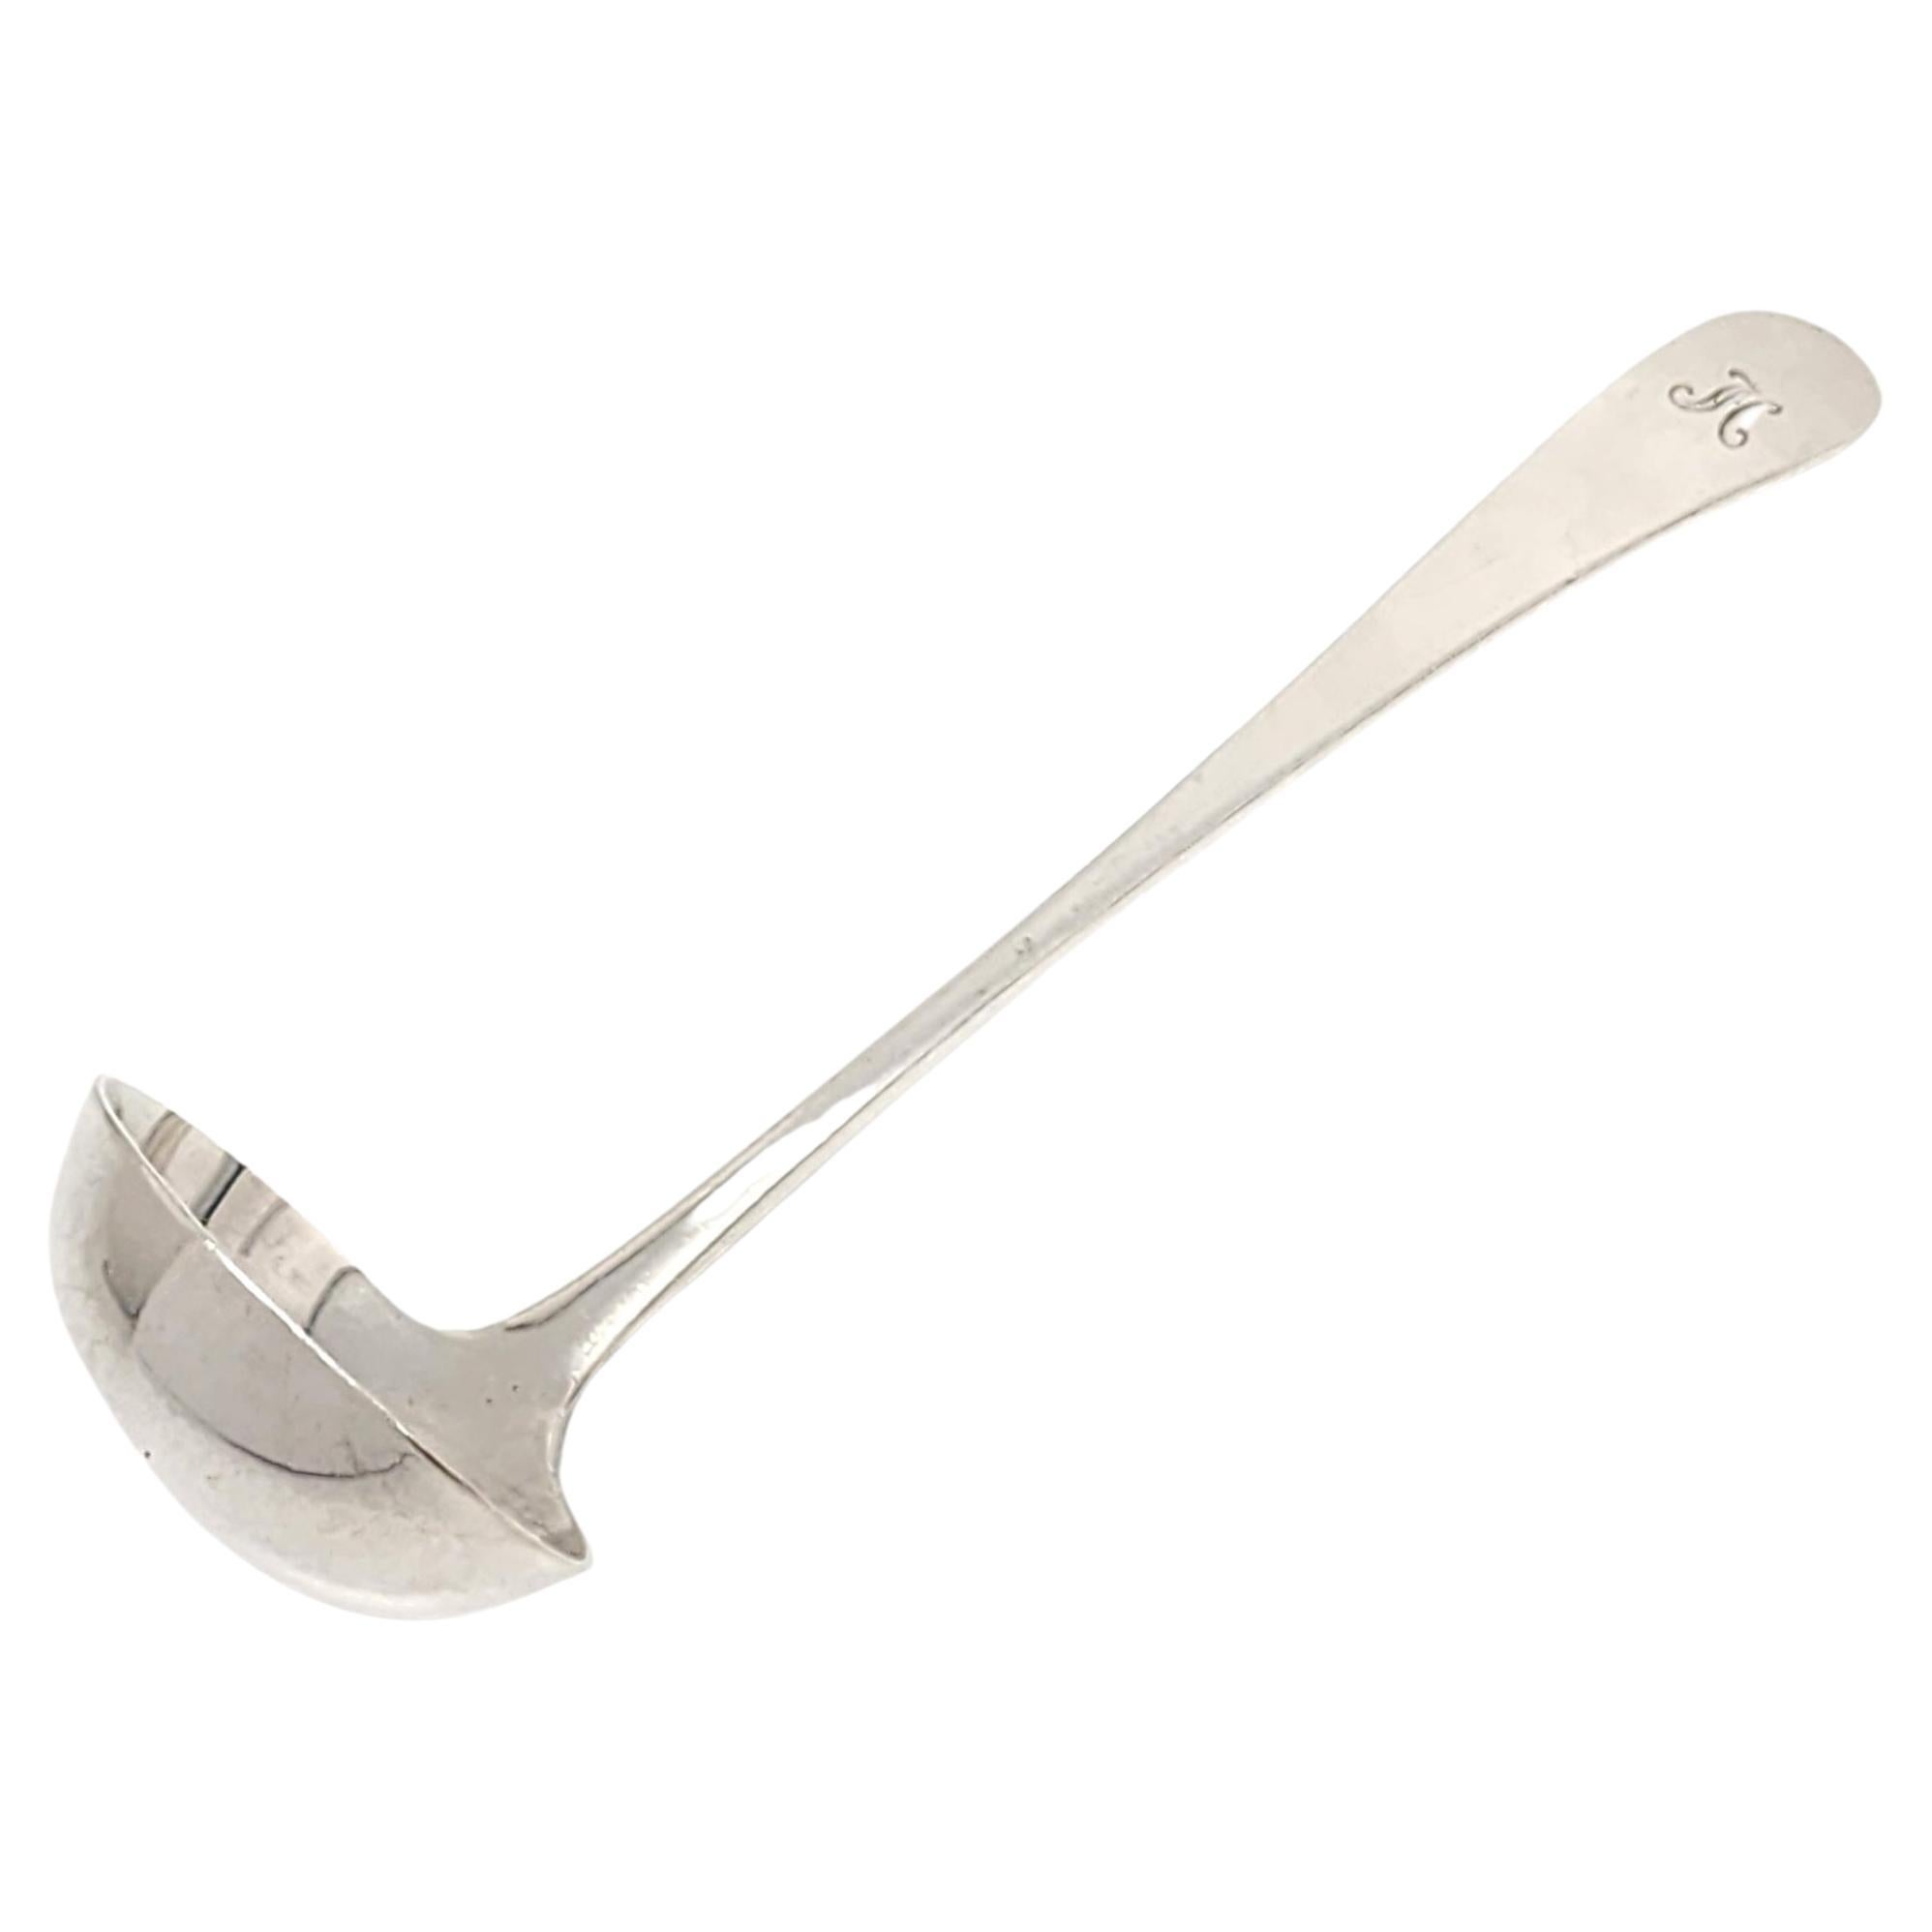 Tiffany & Co Sterling Silver Reproduction Edinborough Ladle with Monogram 'C' For Sale